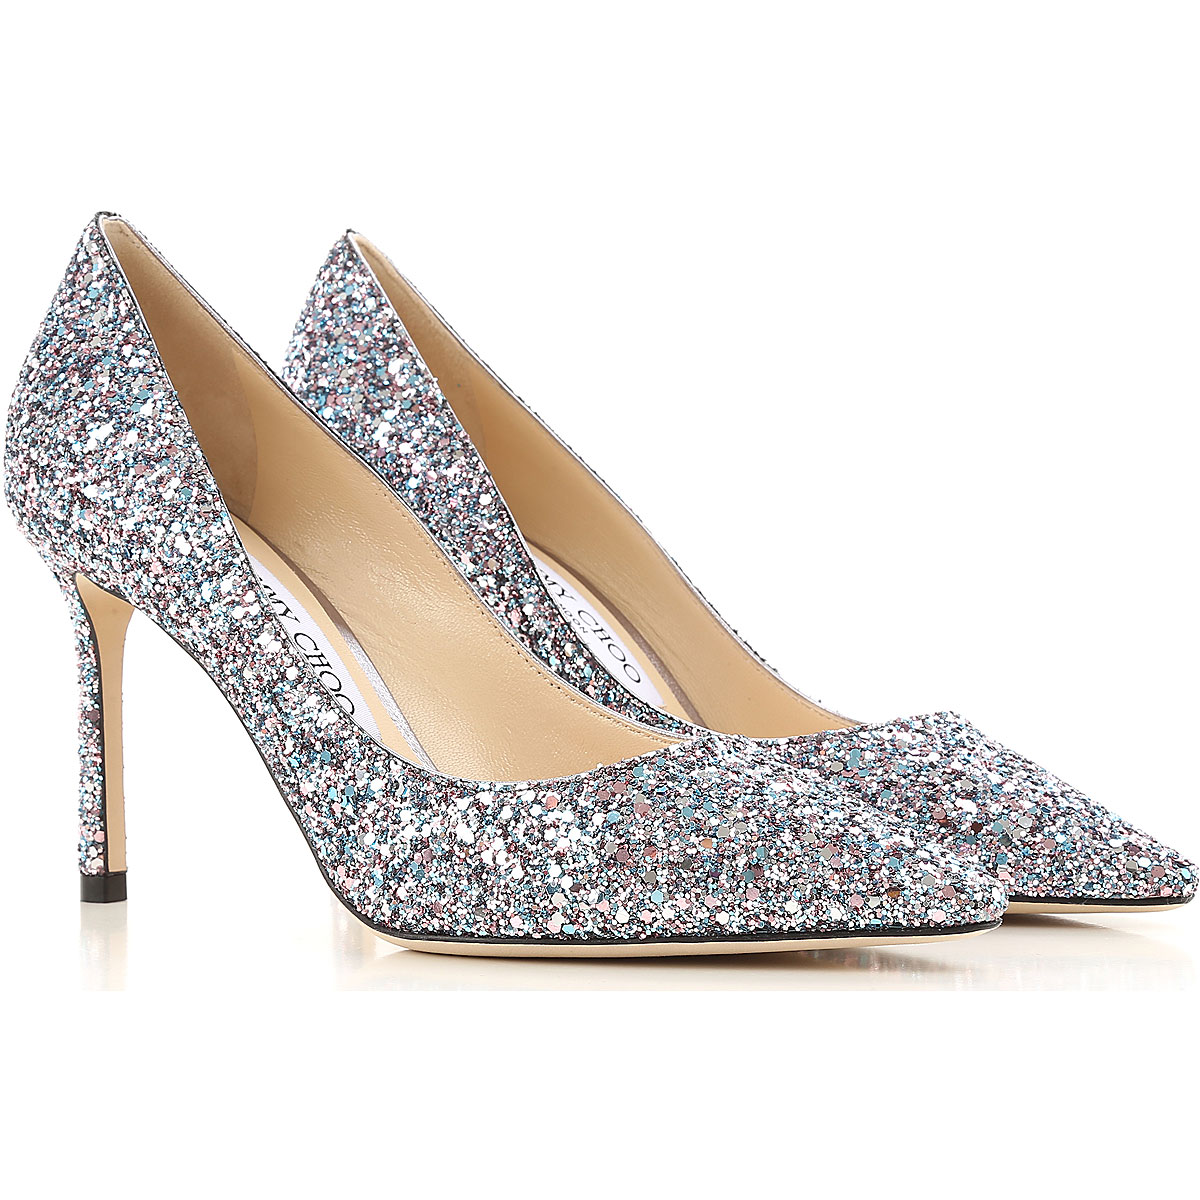 List 91+ Background Images Images Of Jimmy Choo Shoes Updated